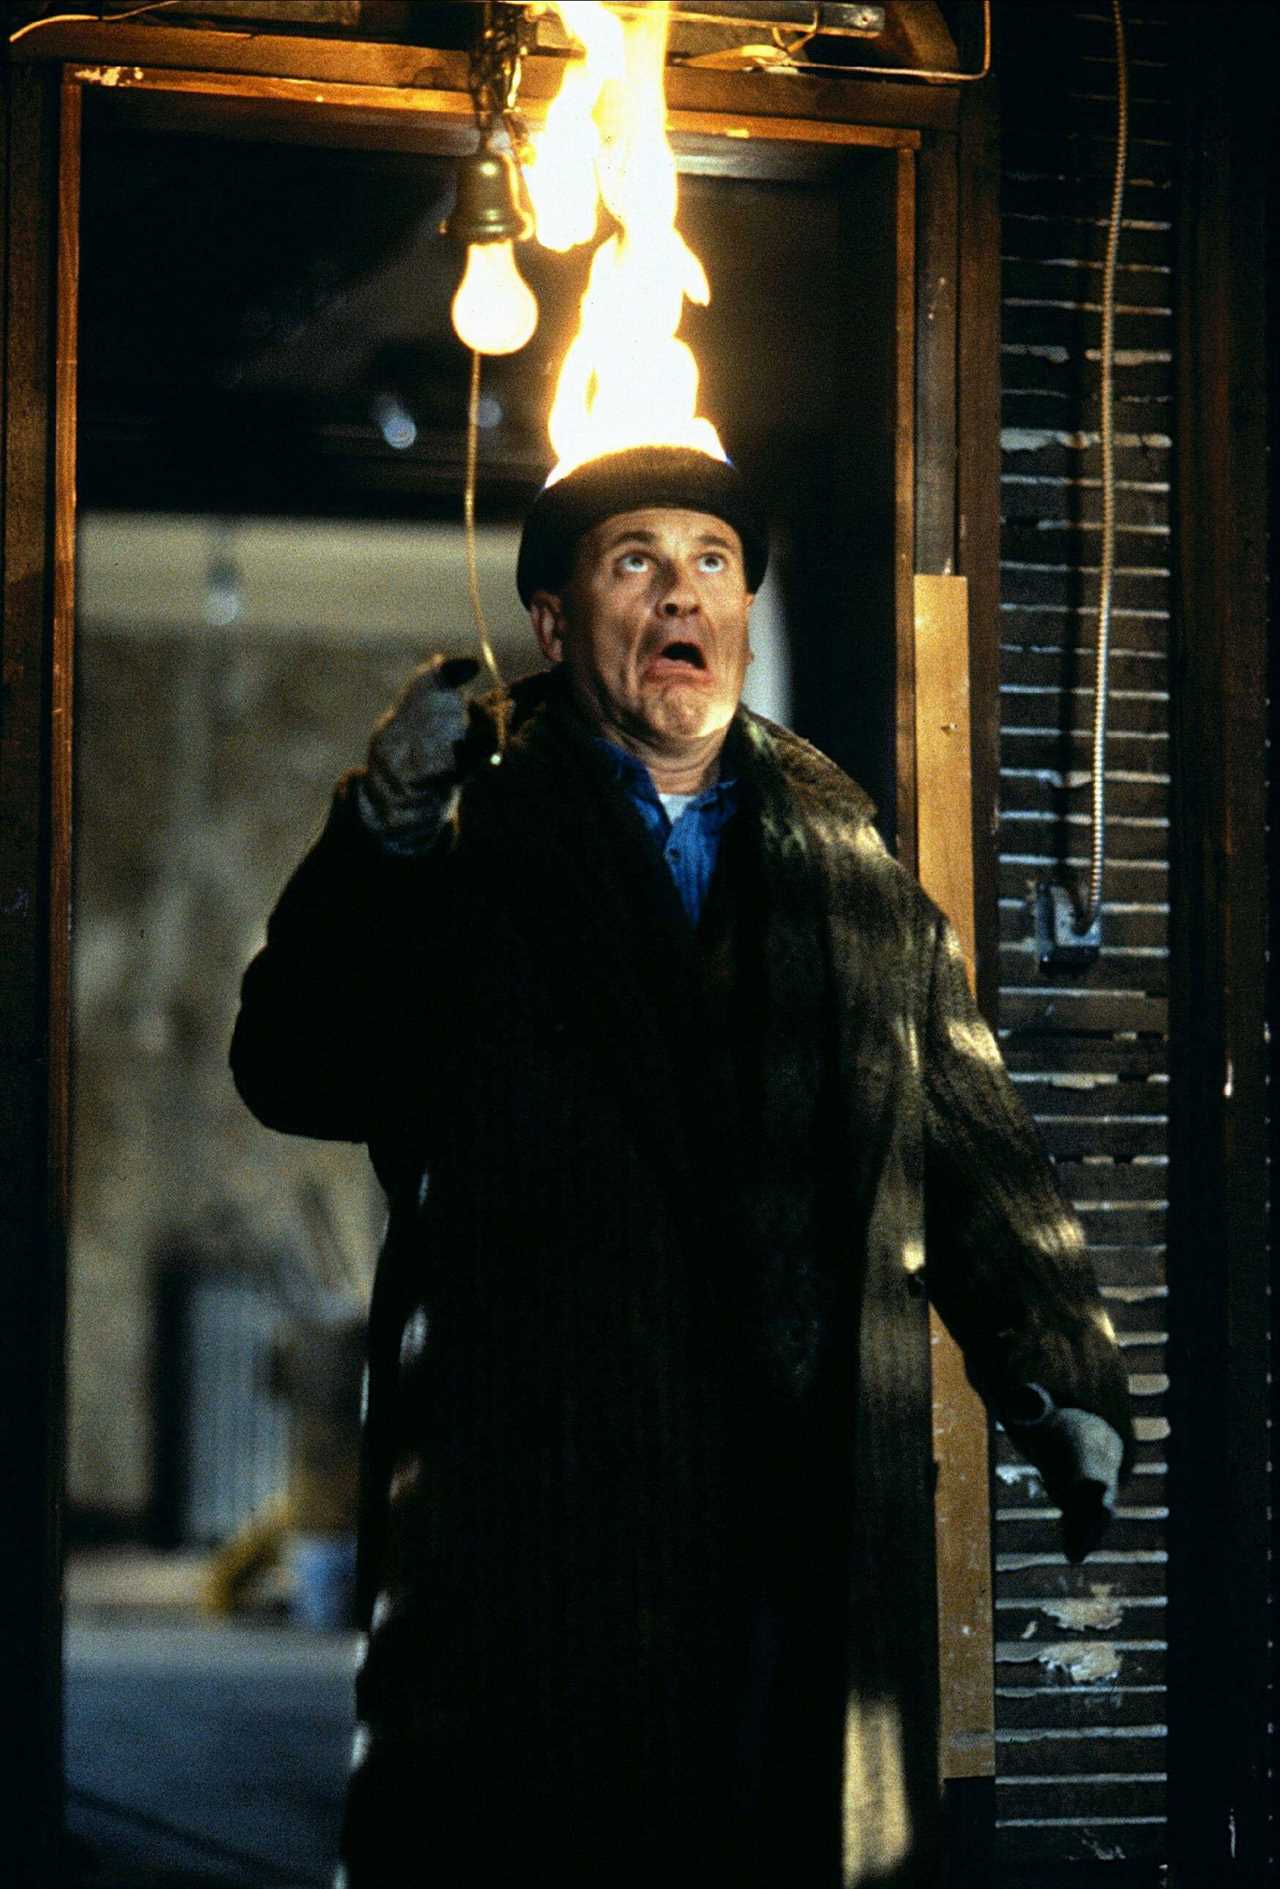 I recreated Kevin’s brutal burglar traps in Home Alone – and was utterly horrified by what would happen in real-life